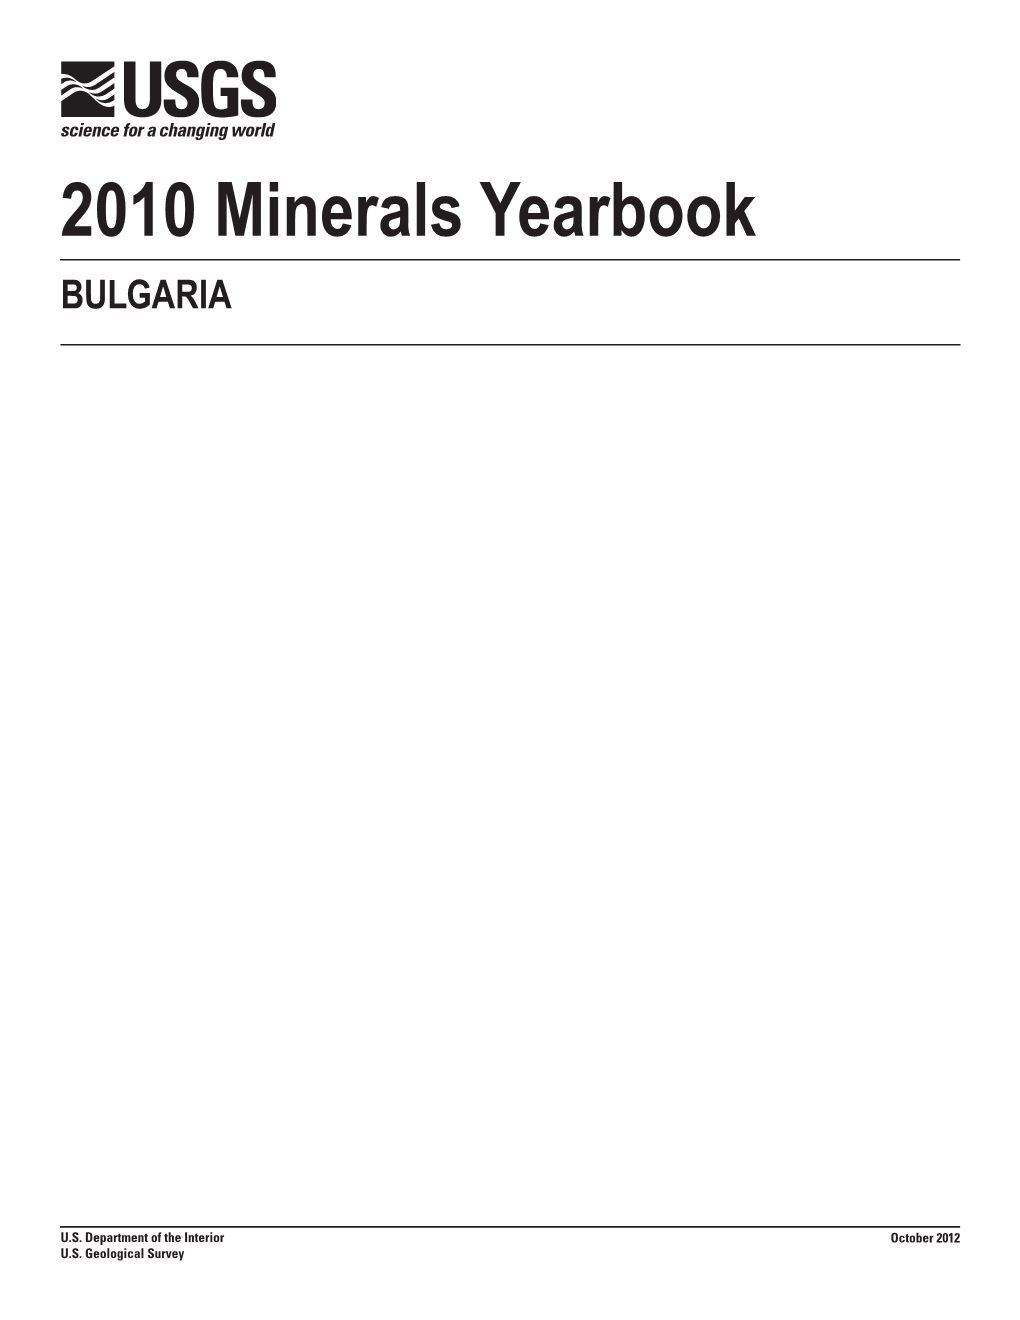 The Mineral Industry of Bulgaria in 2010